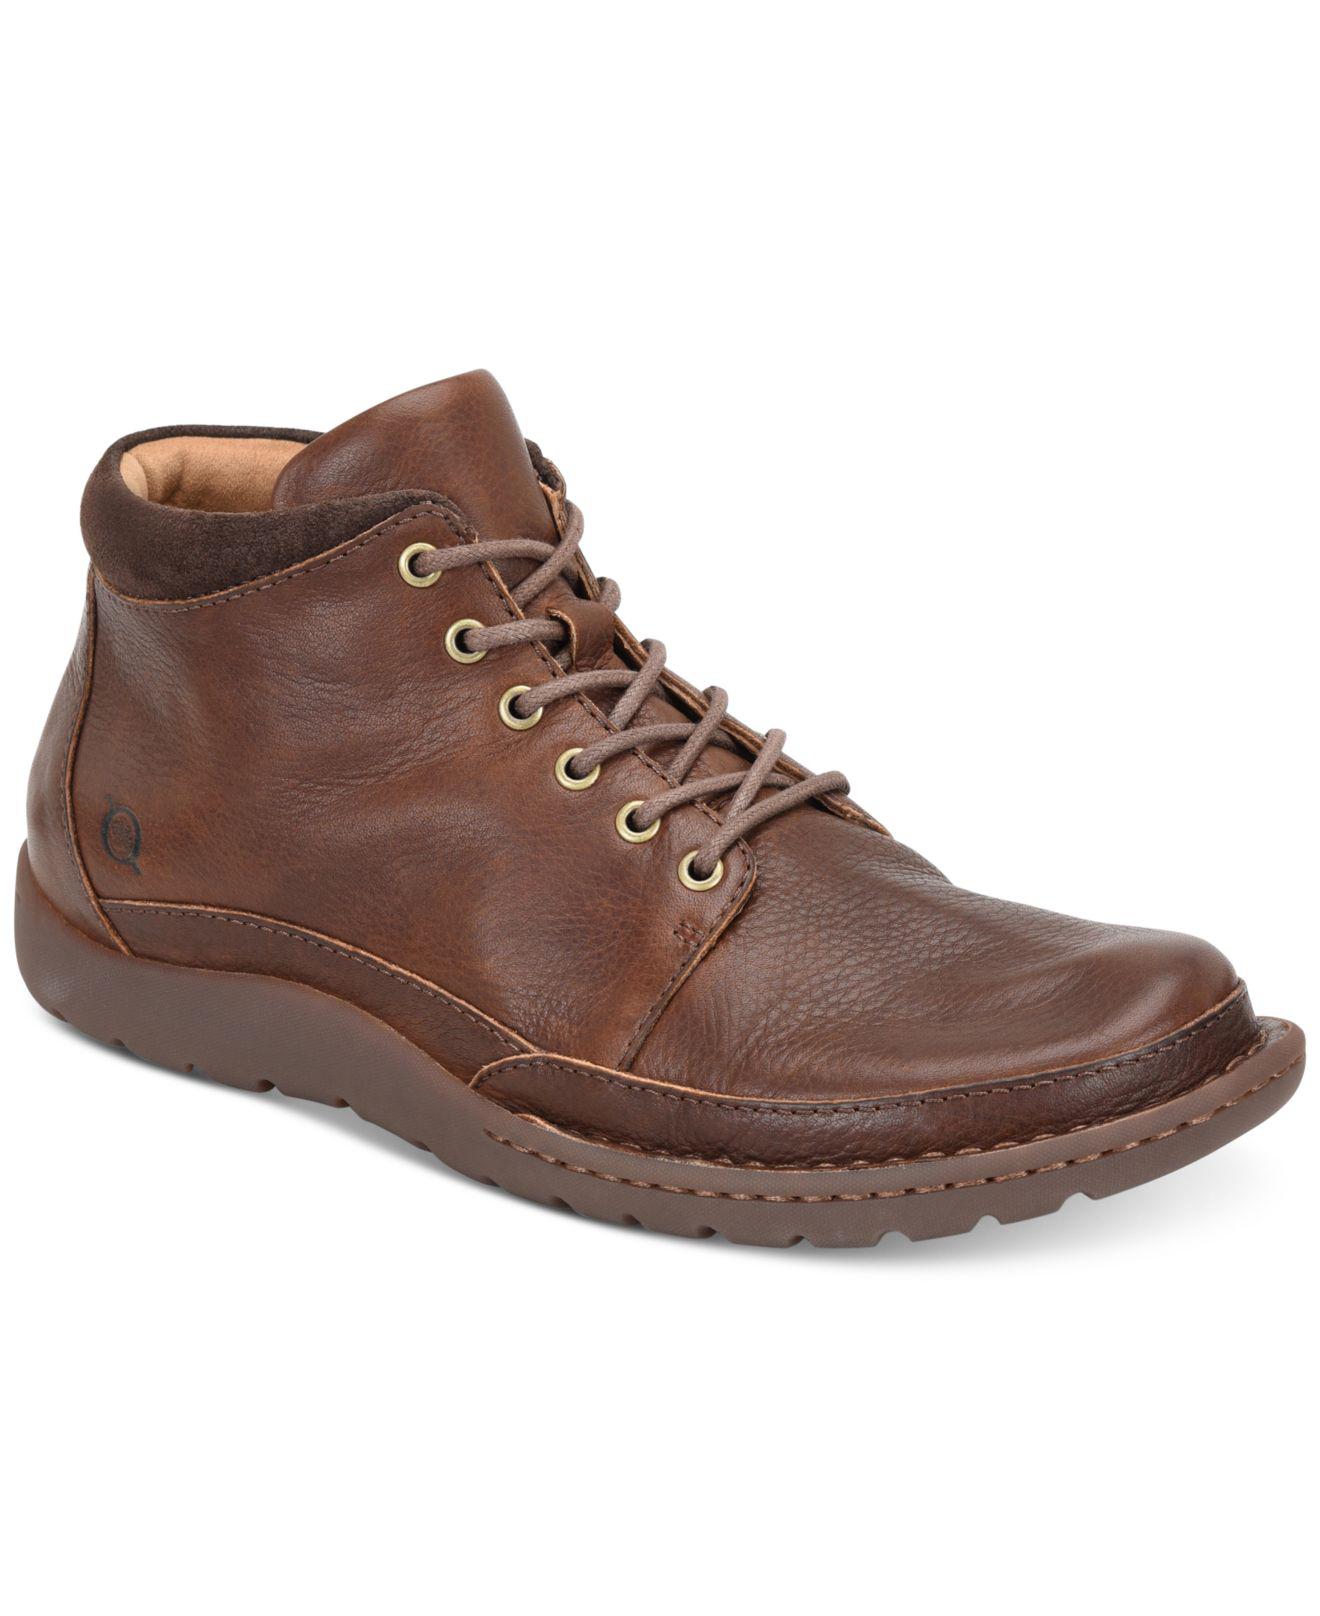 Born Leather Men's Nigel Boots in Brown for Men - Lyst